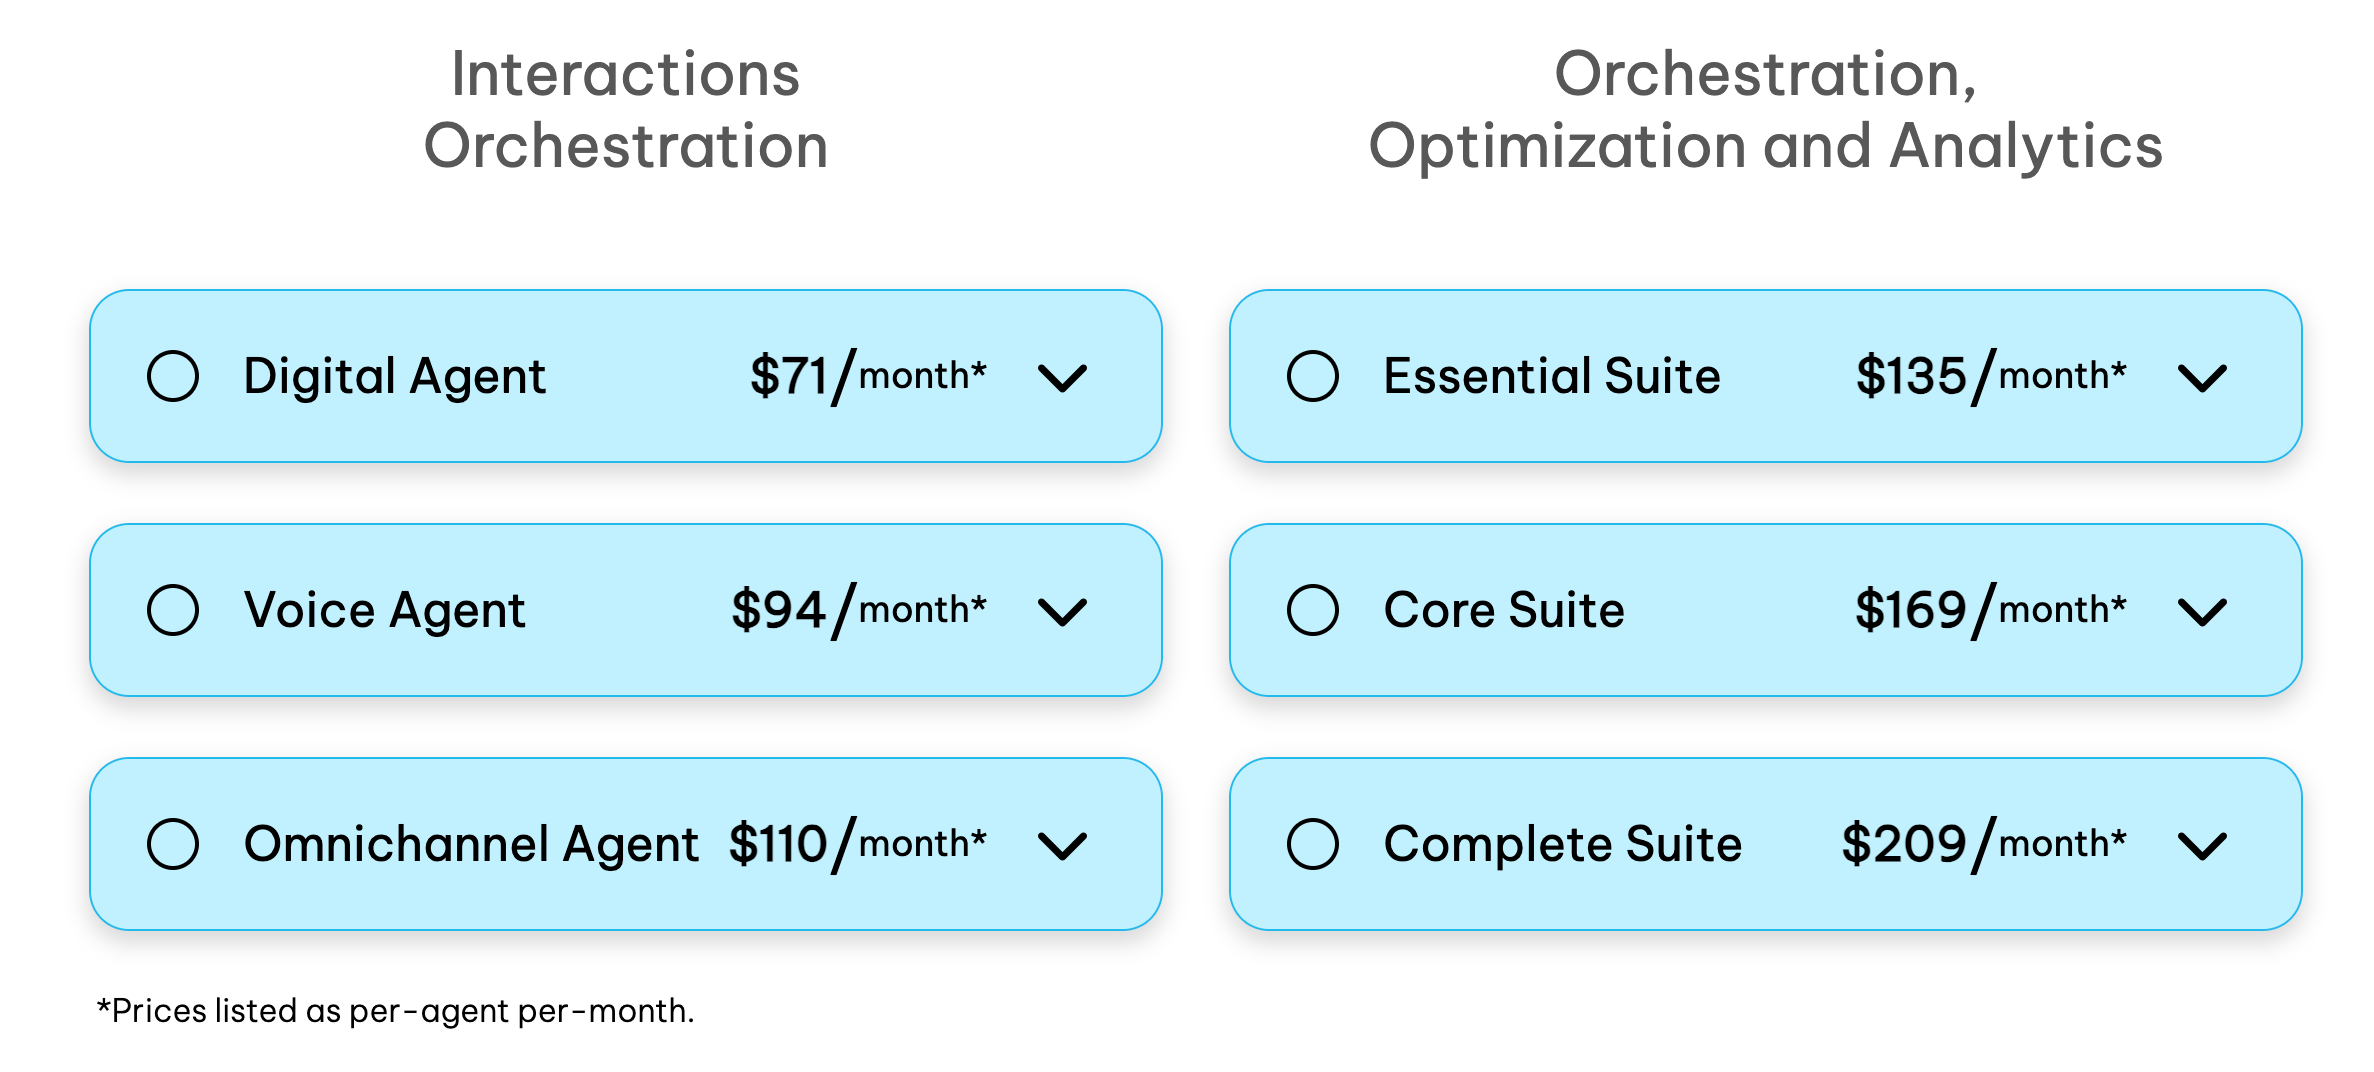 Interactions orchestration vs orchestration, optimization and analytics